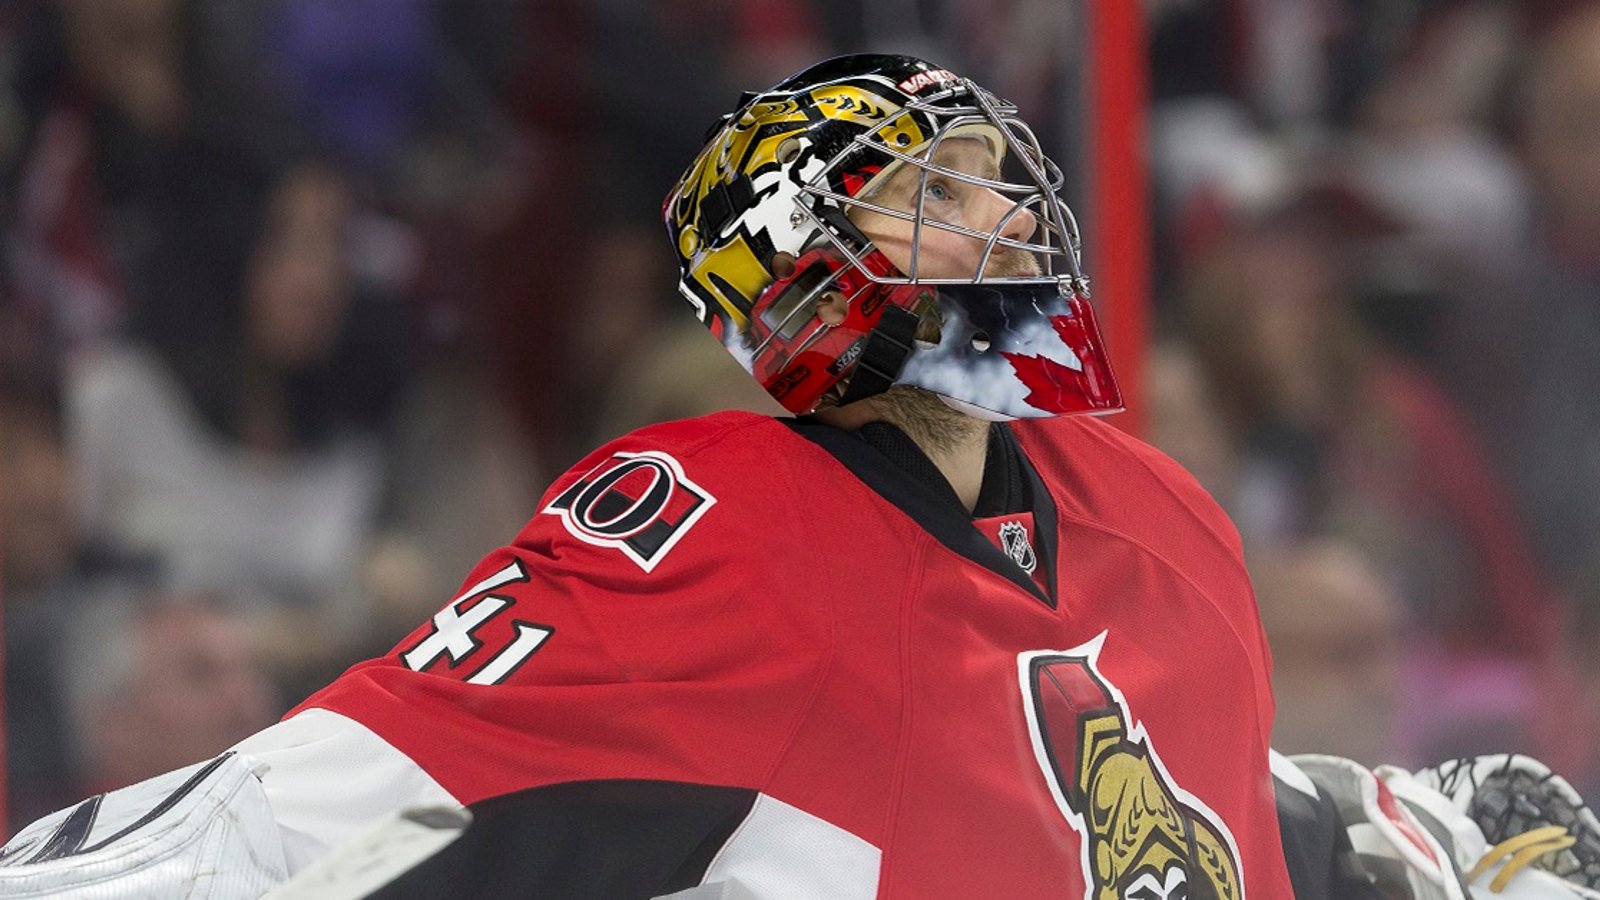 Craig Anderson reportedly threatened to slash Penguins star if he entered his crease.